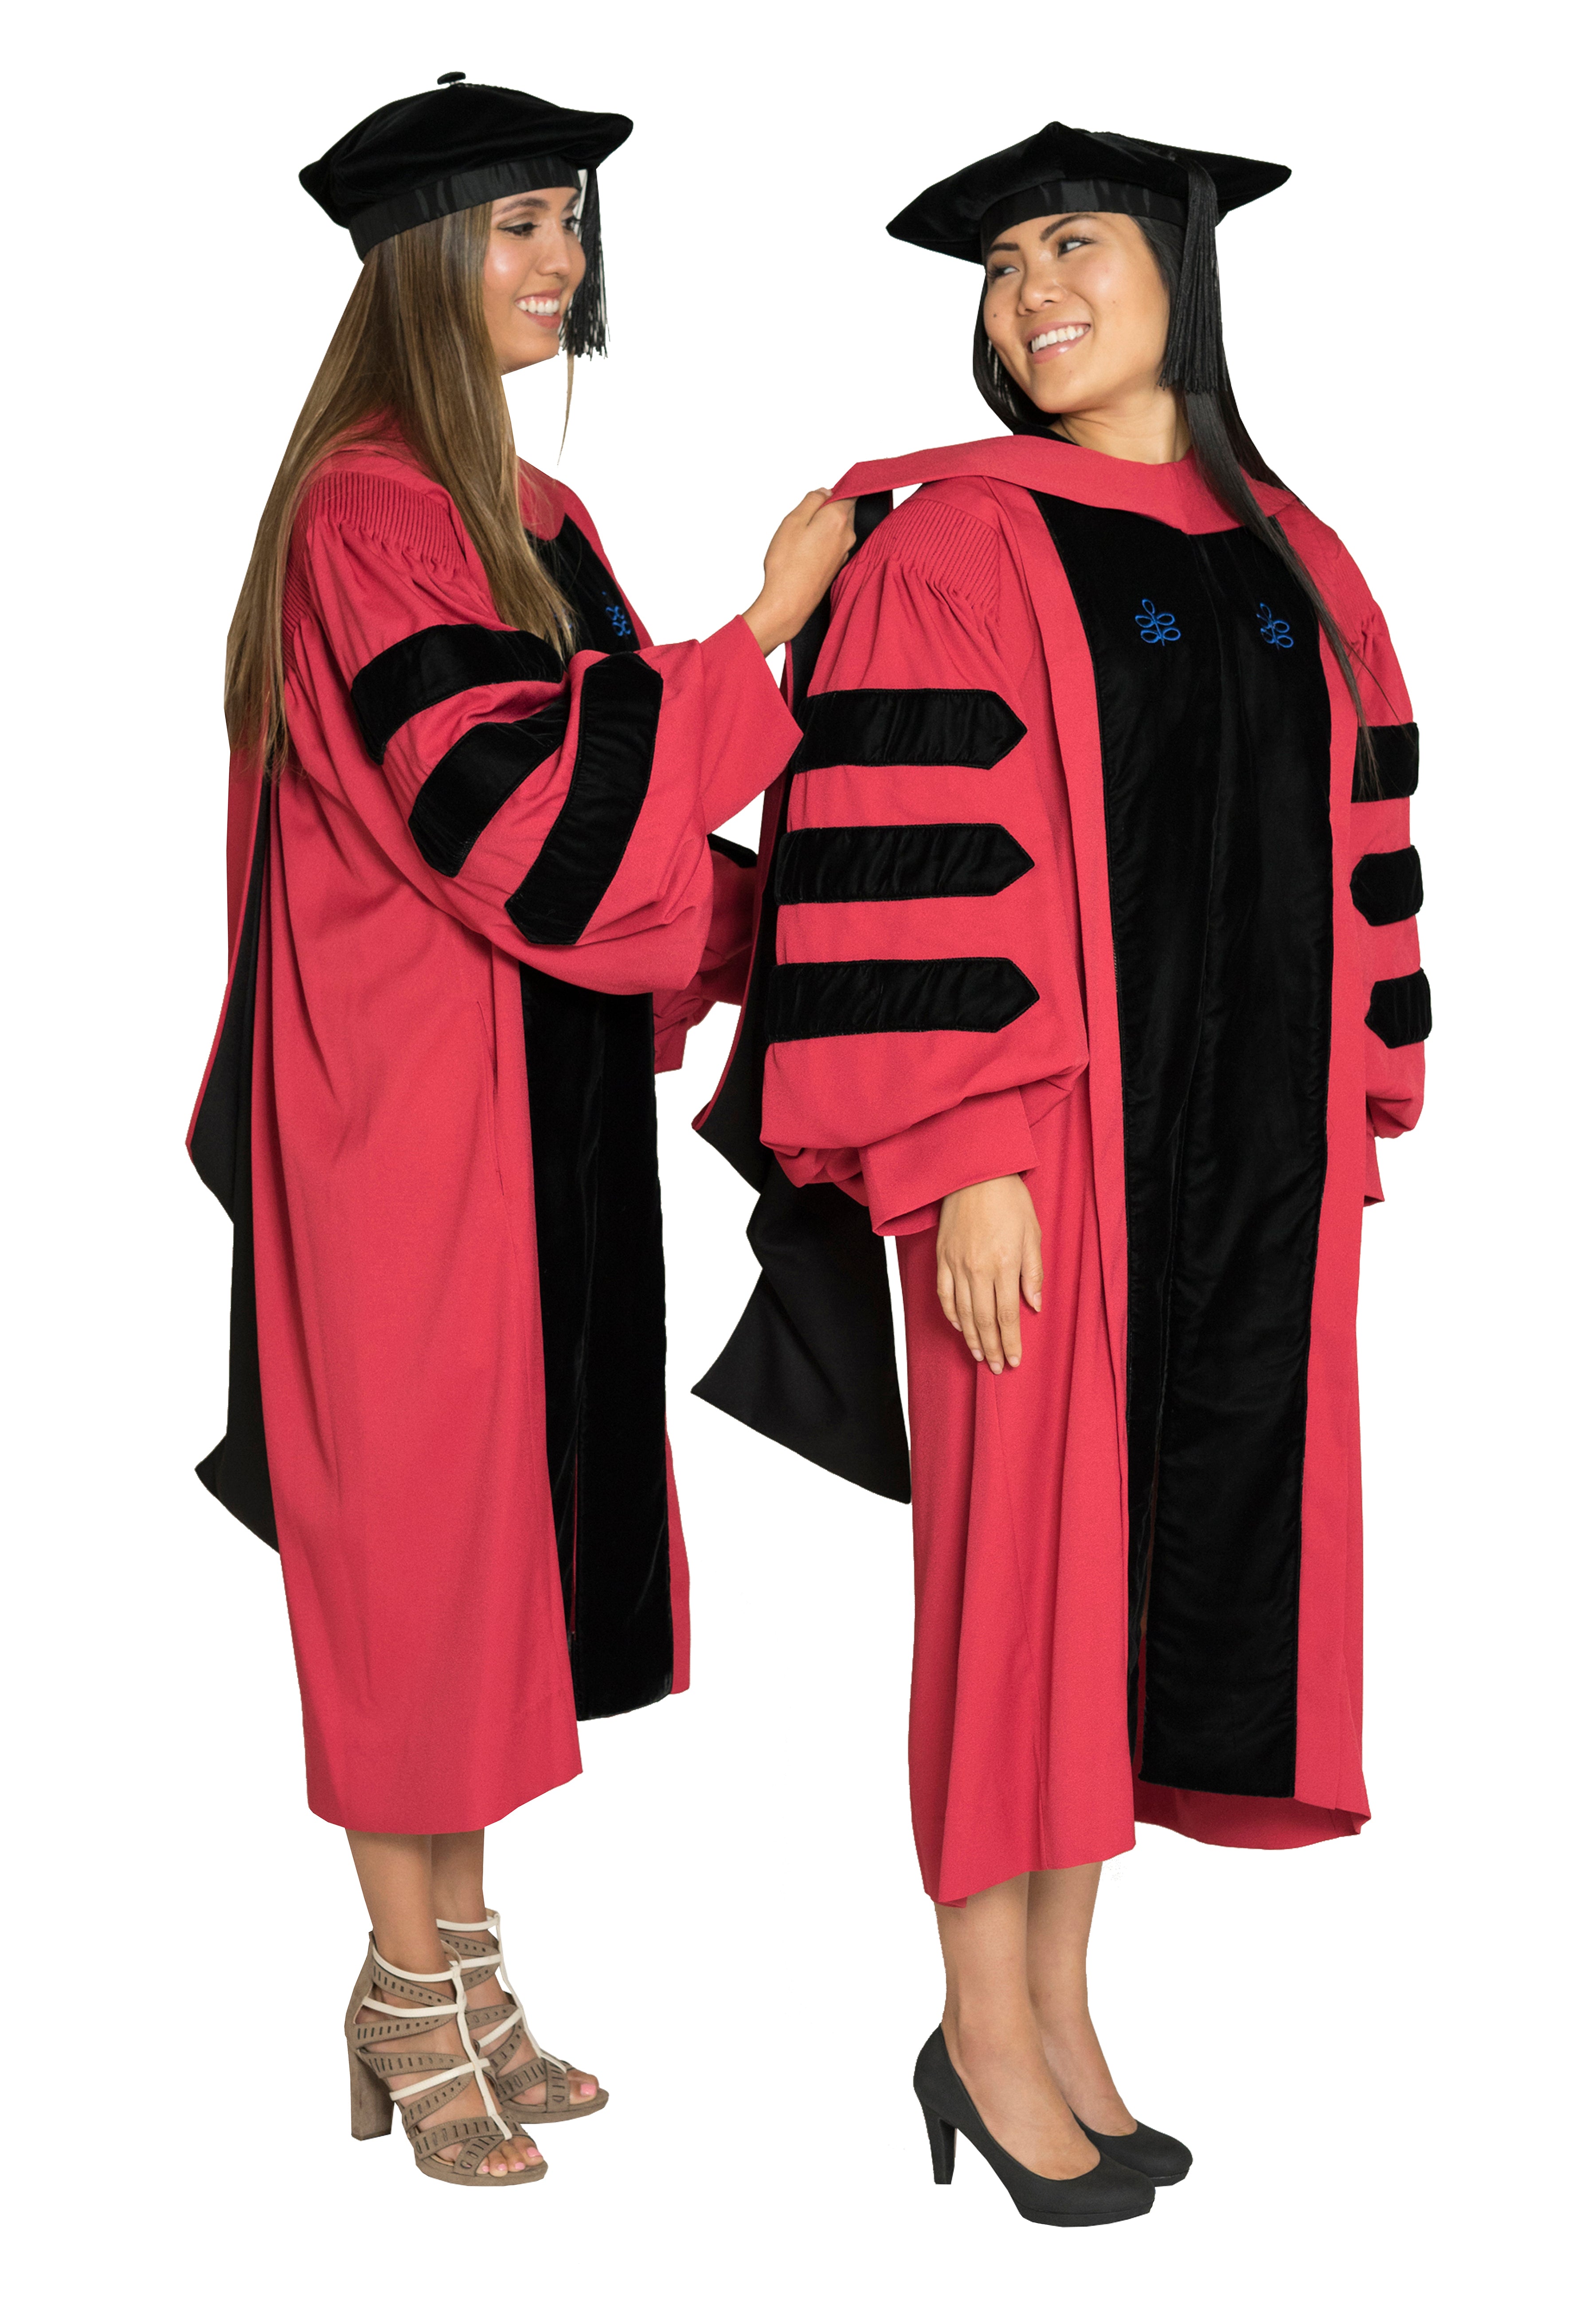 How To Wear Your Academic Hood – CAPGOWN